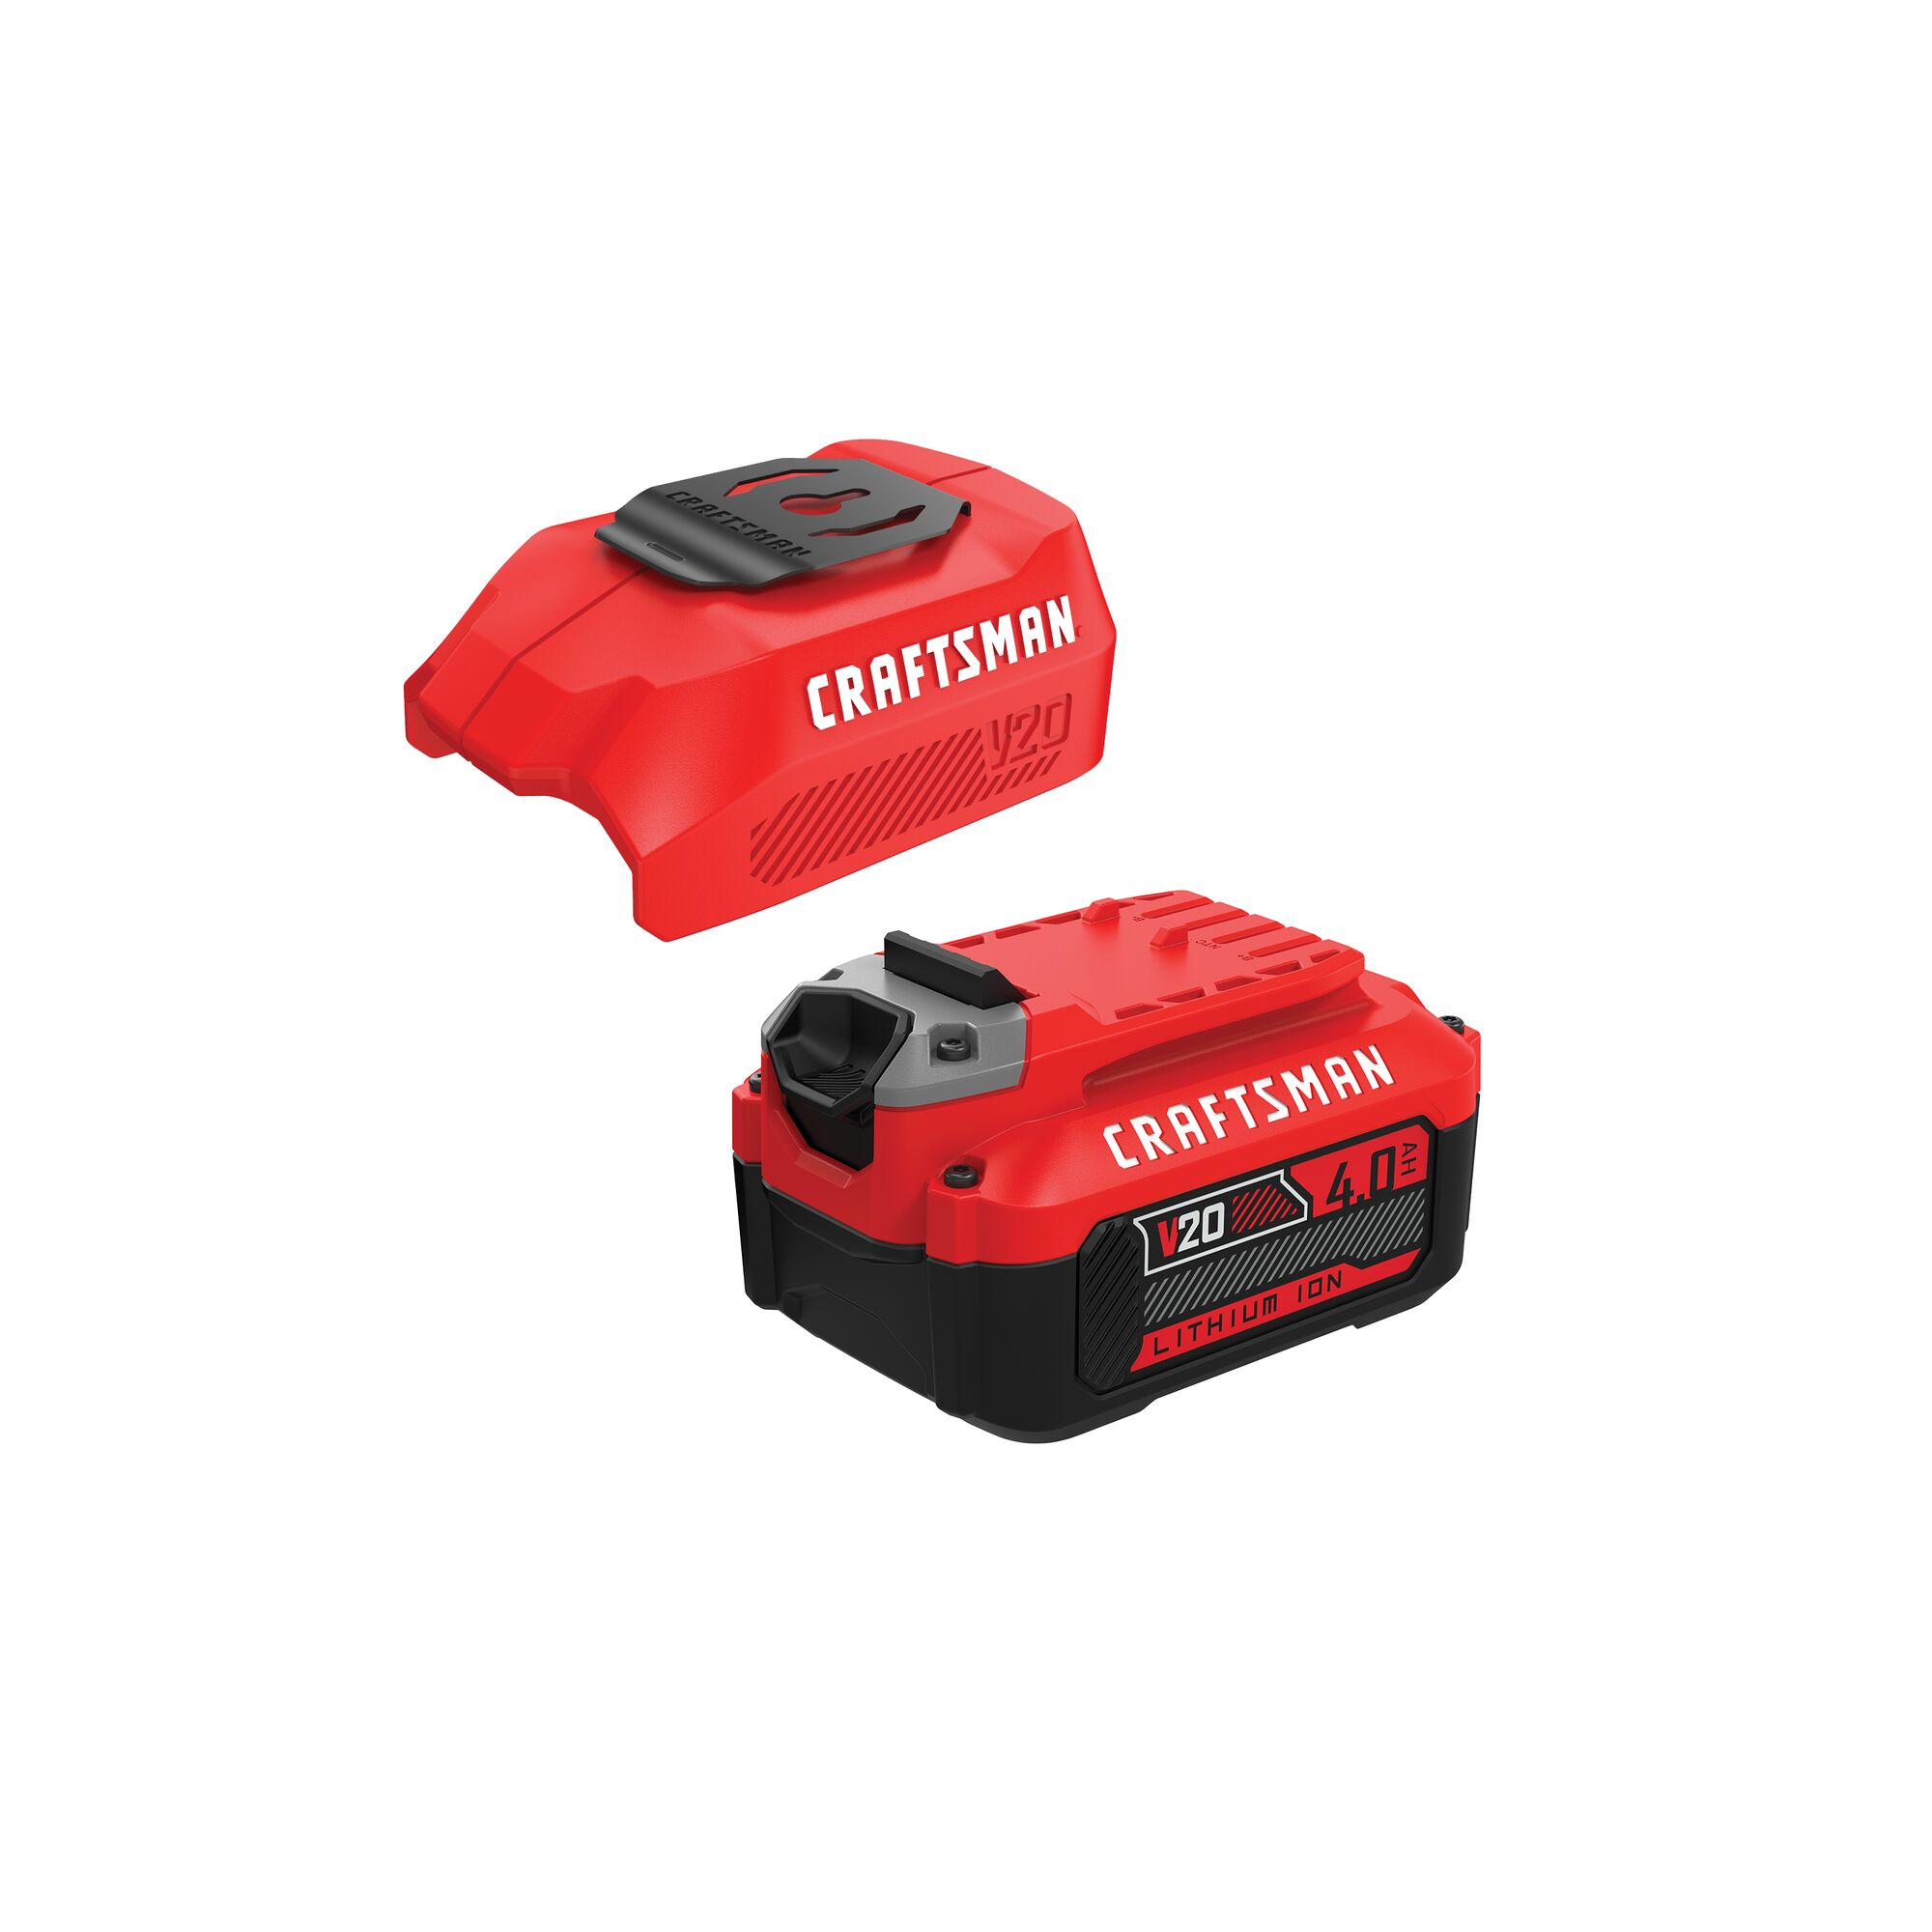 View of CRAFTSMAN Batteries & Chargers family of products